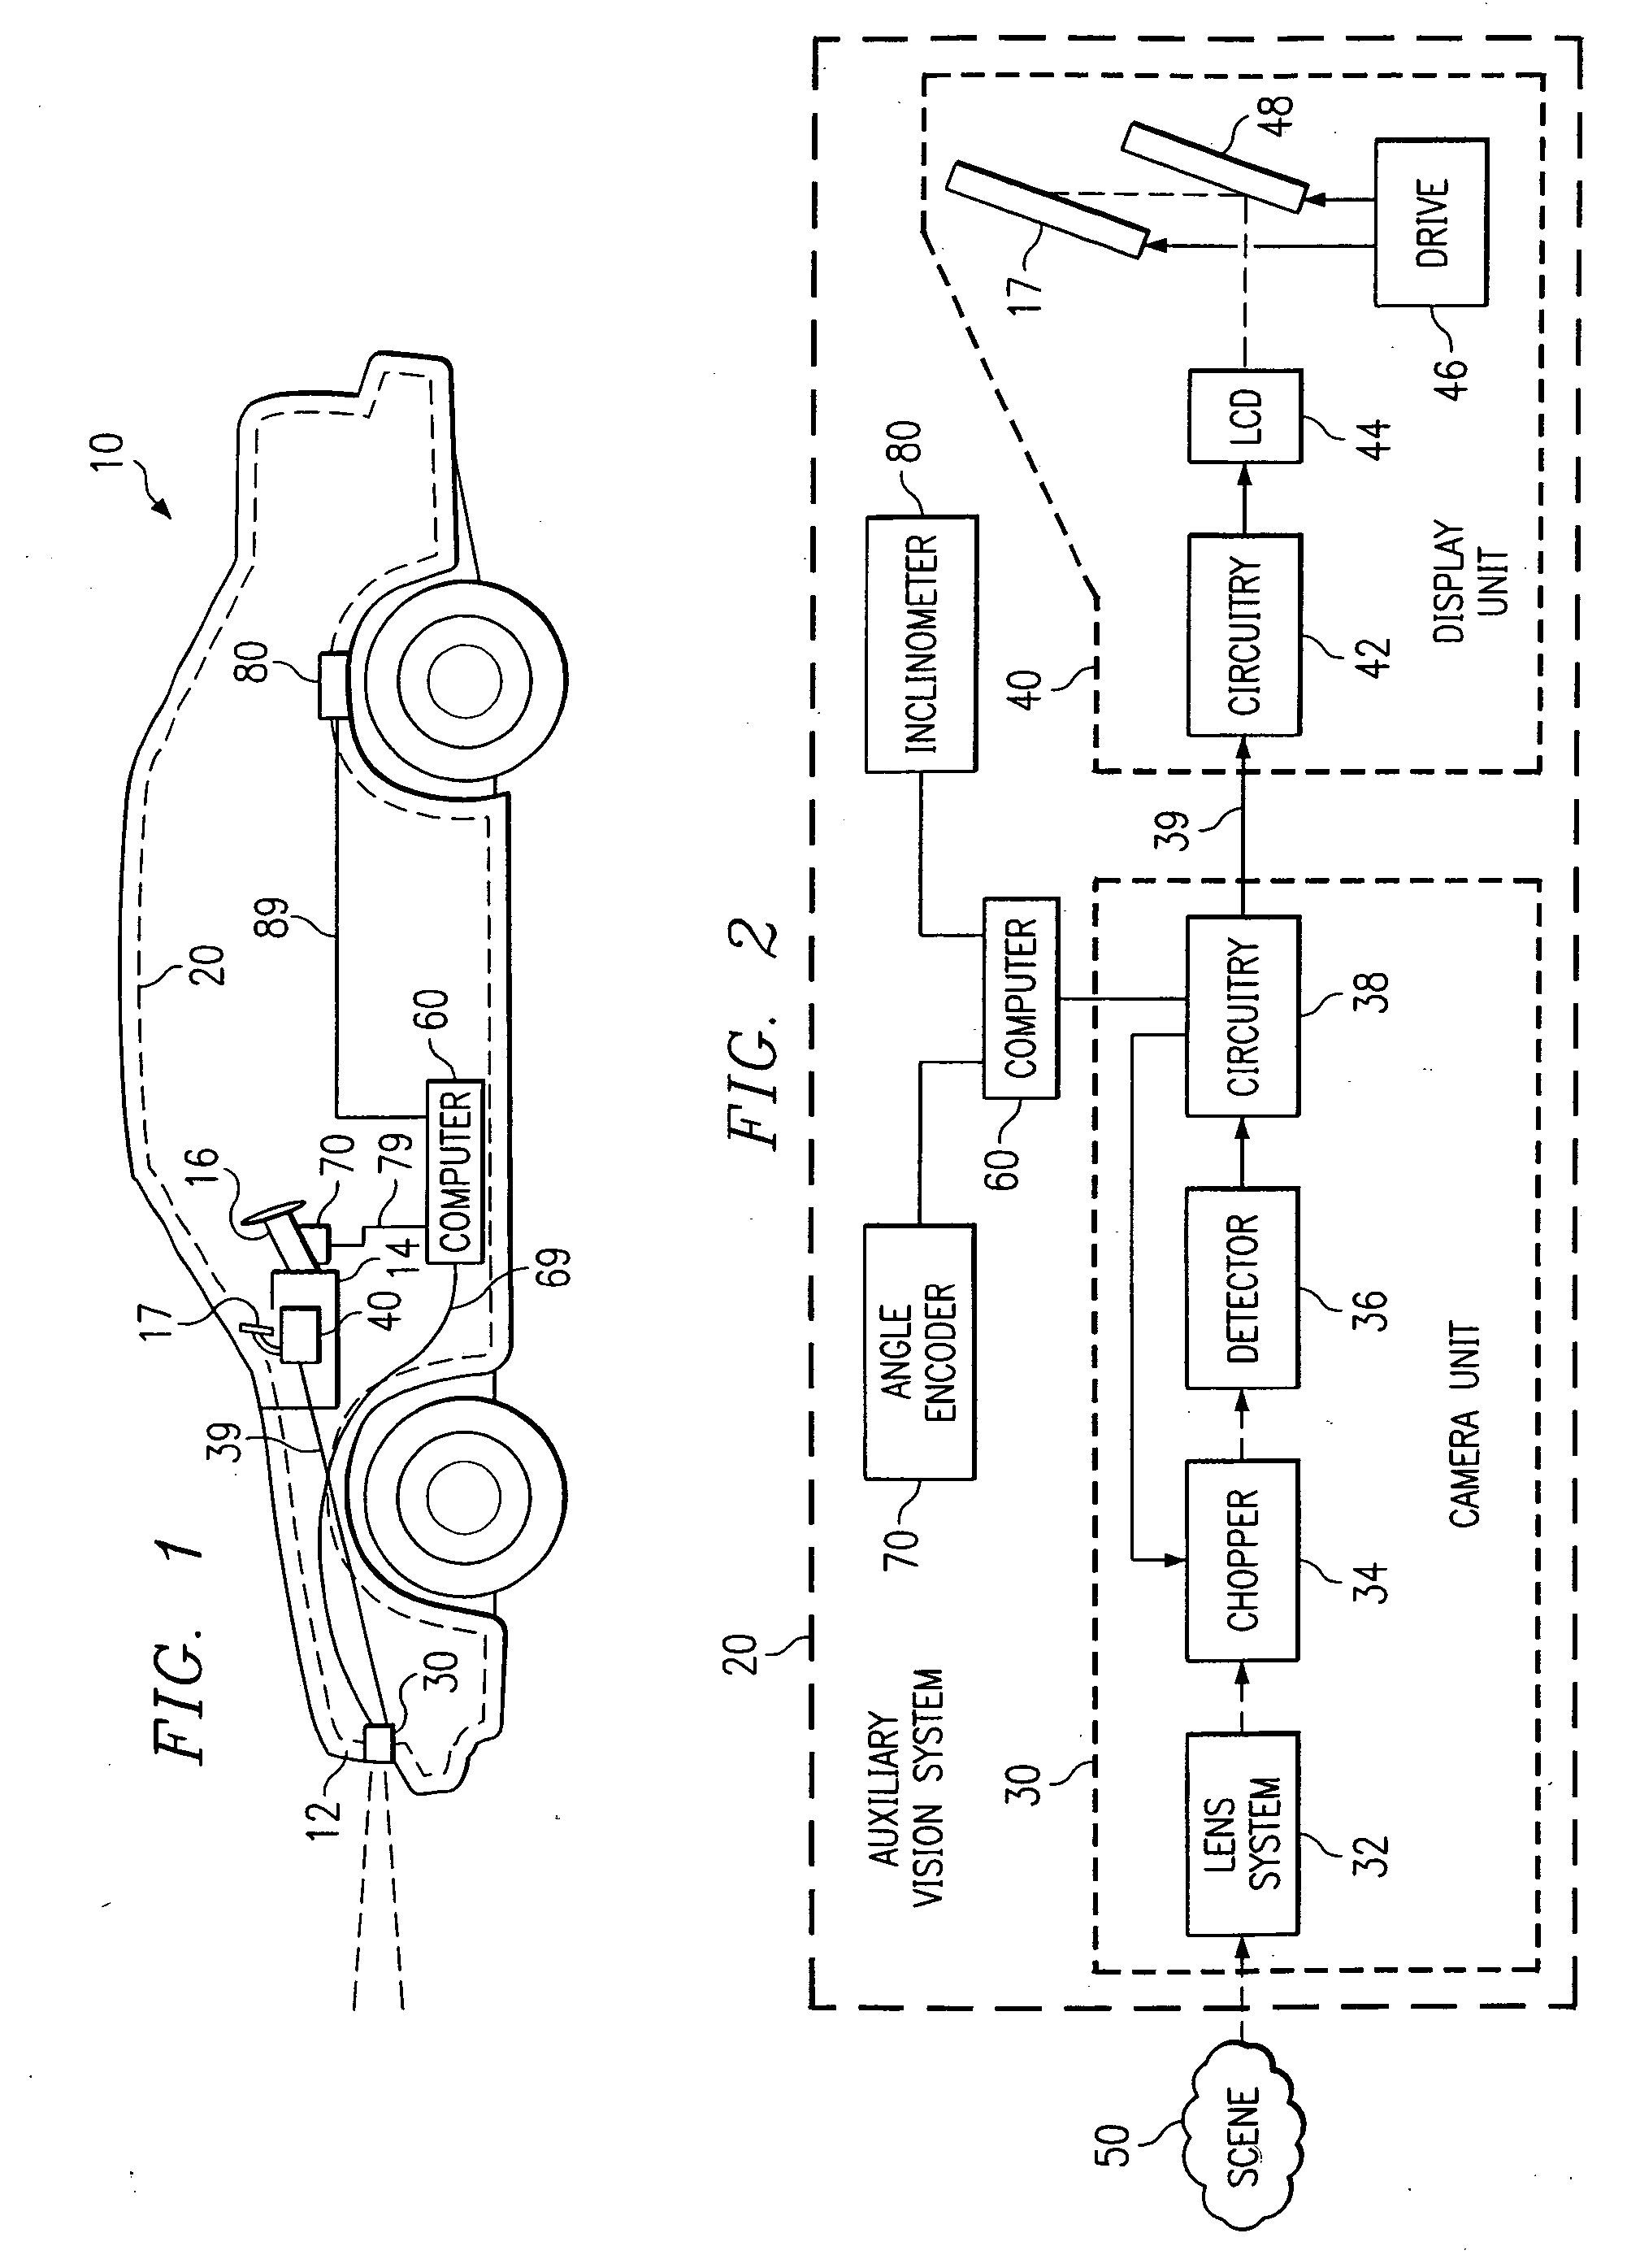 Method and system for deploying a mirror assembly from a recessed position